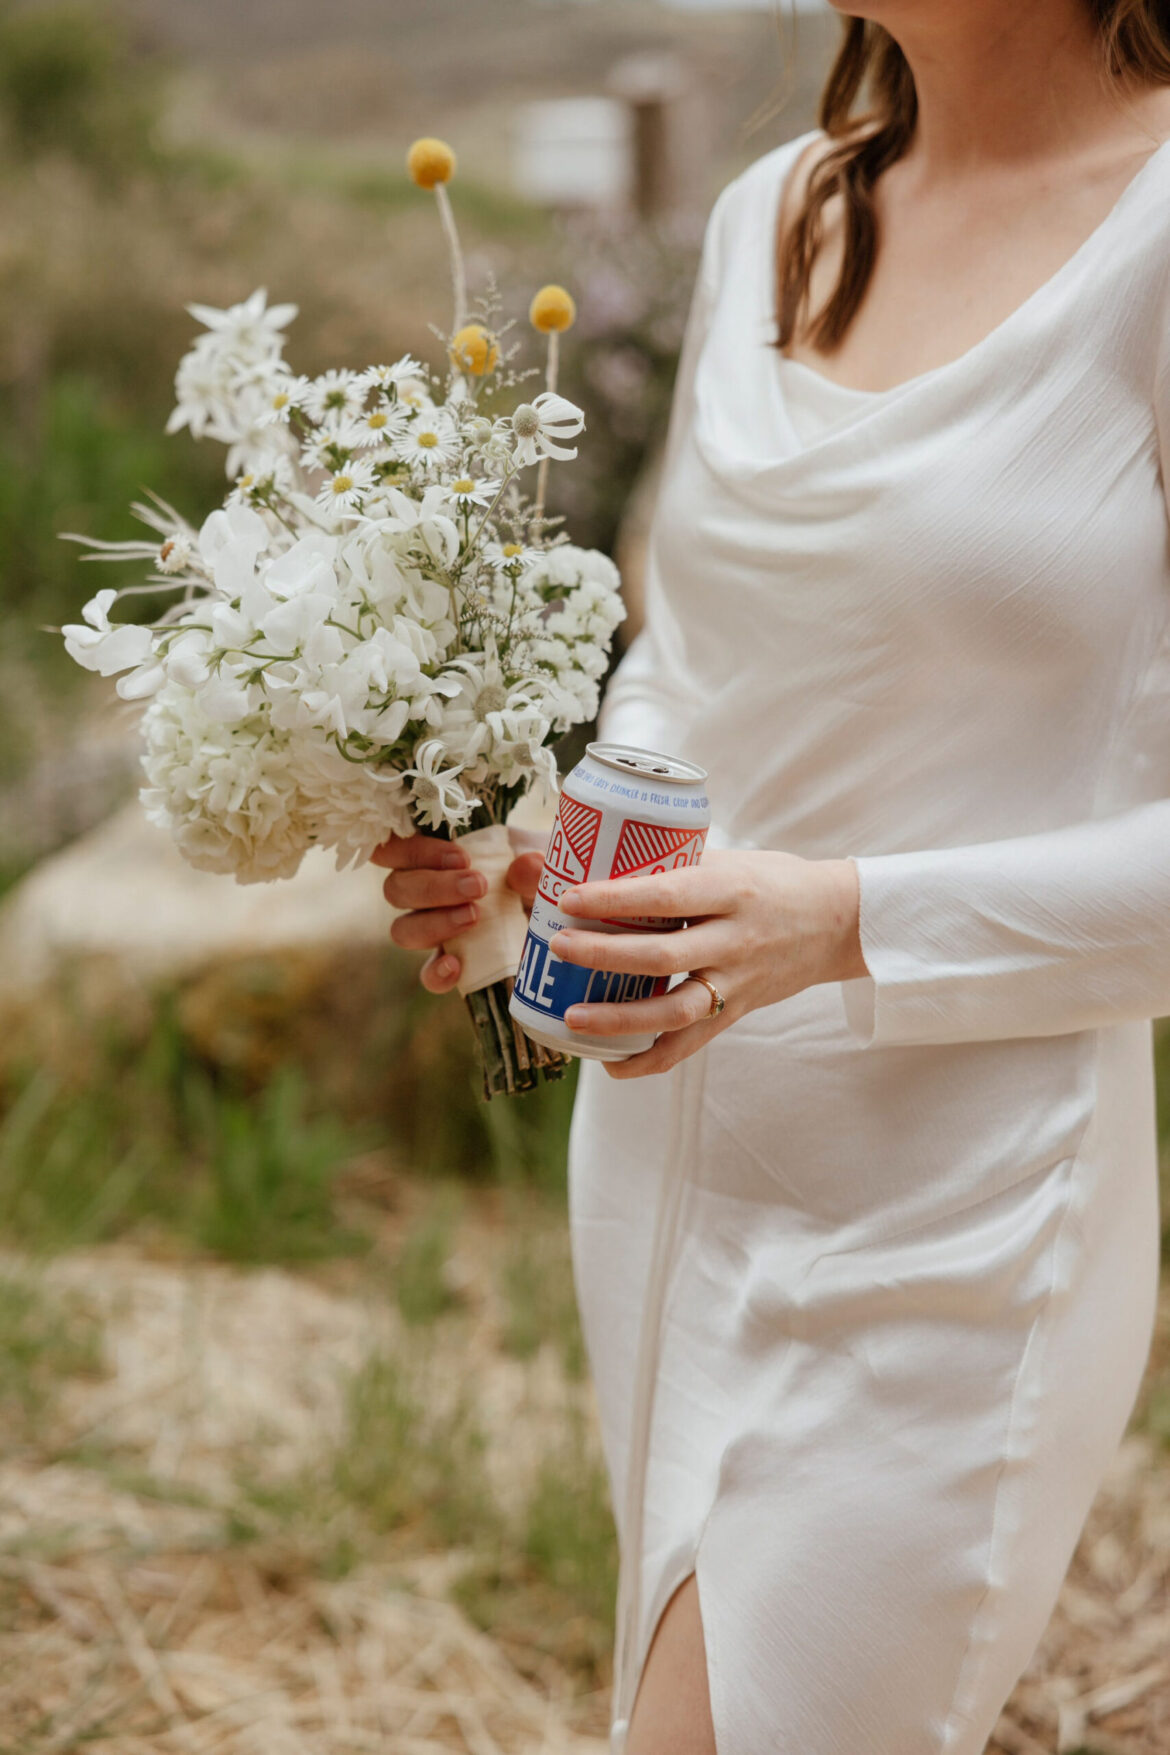 A bride holds both a beer and some wedding flowers on her wedding day